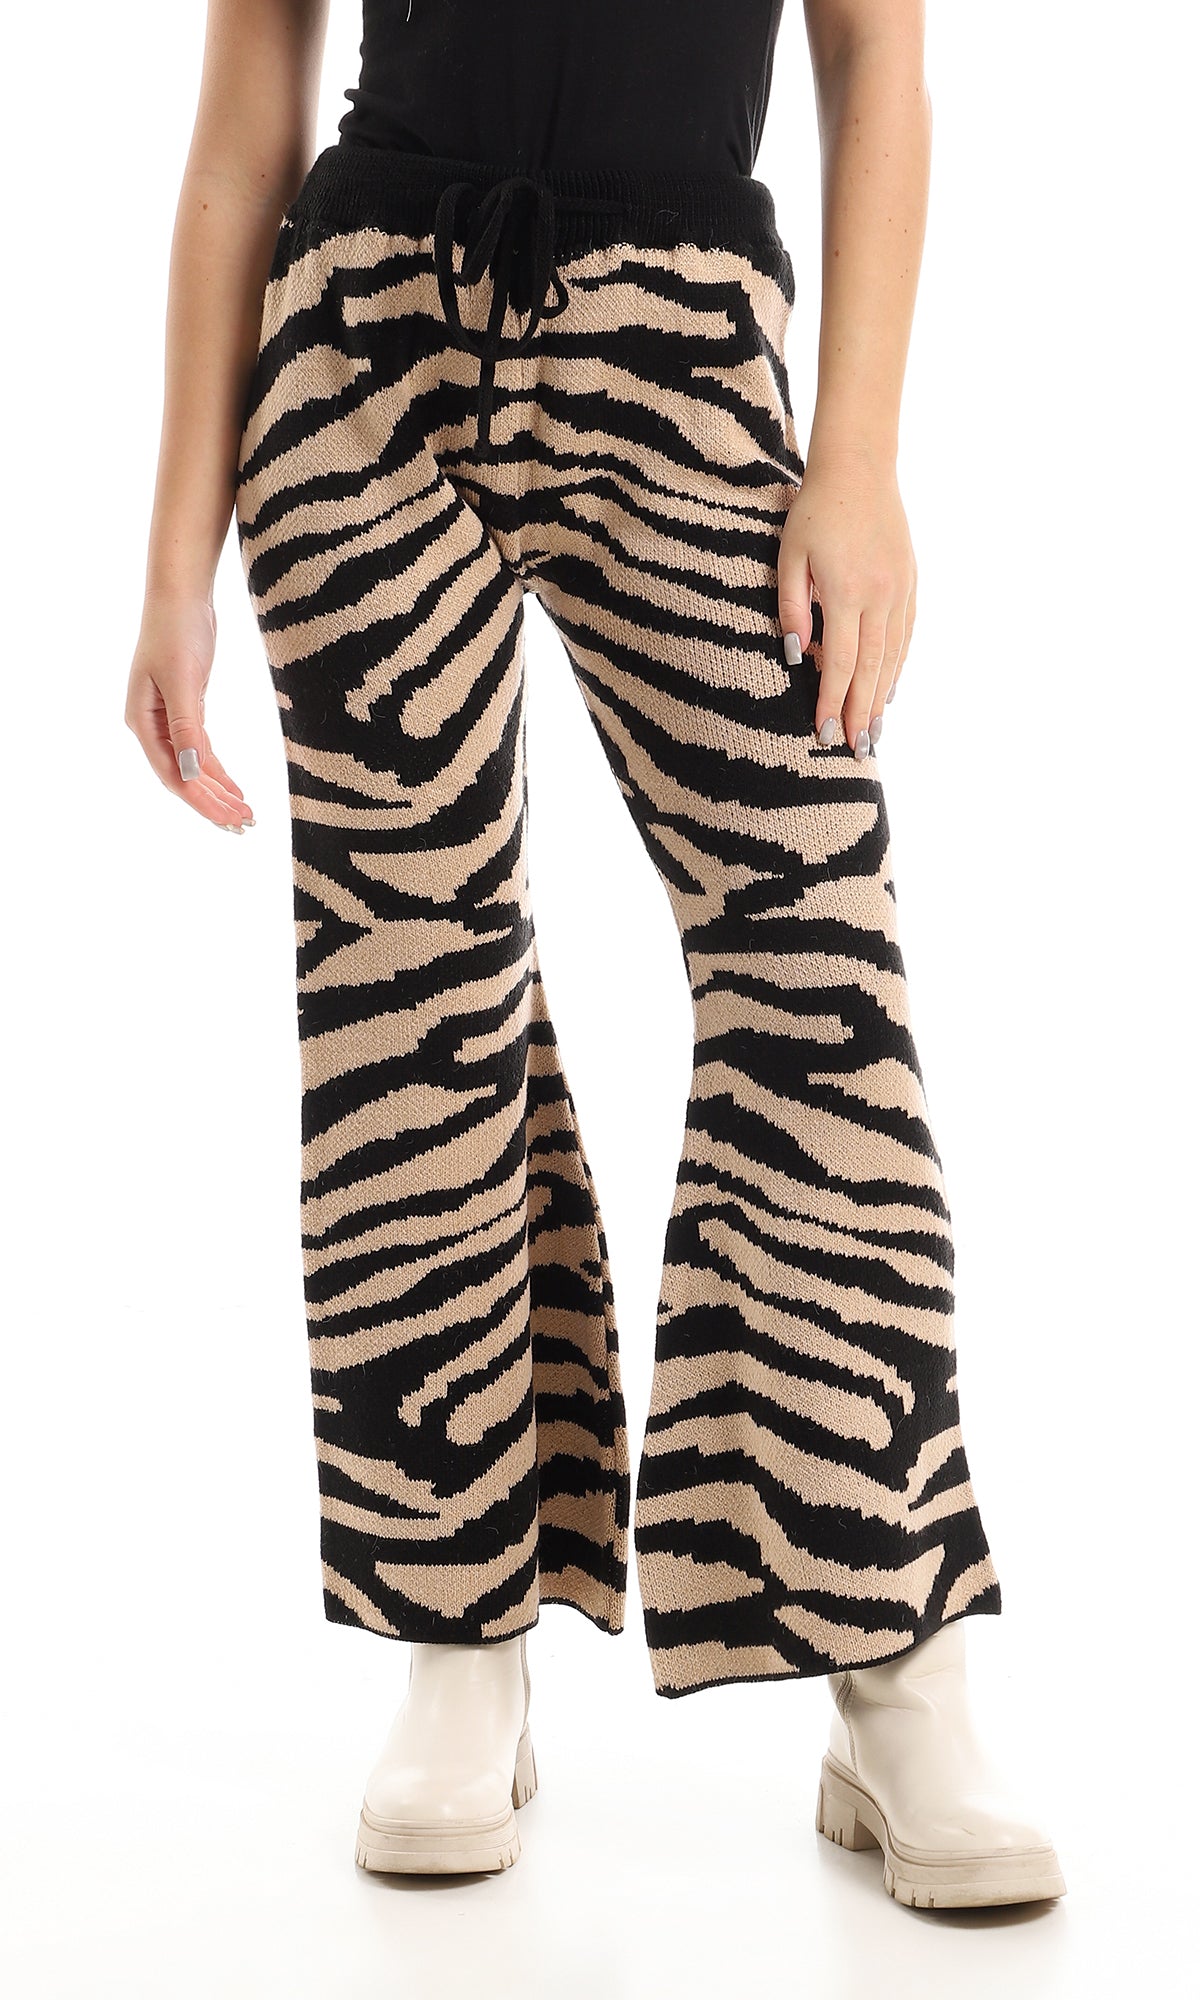 O158053 Knitted Animal Patterned Wide Leg Pants With Elastic Waist - Beige & Black